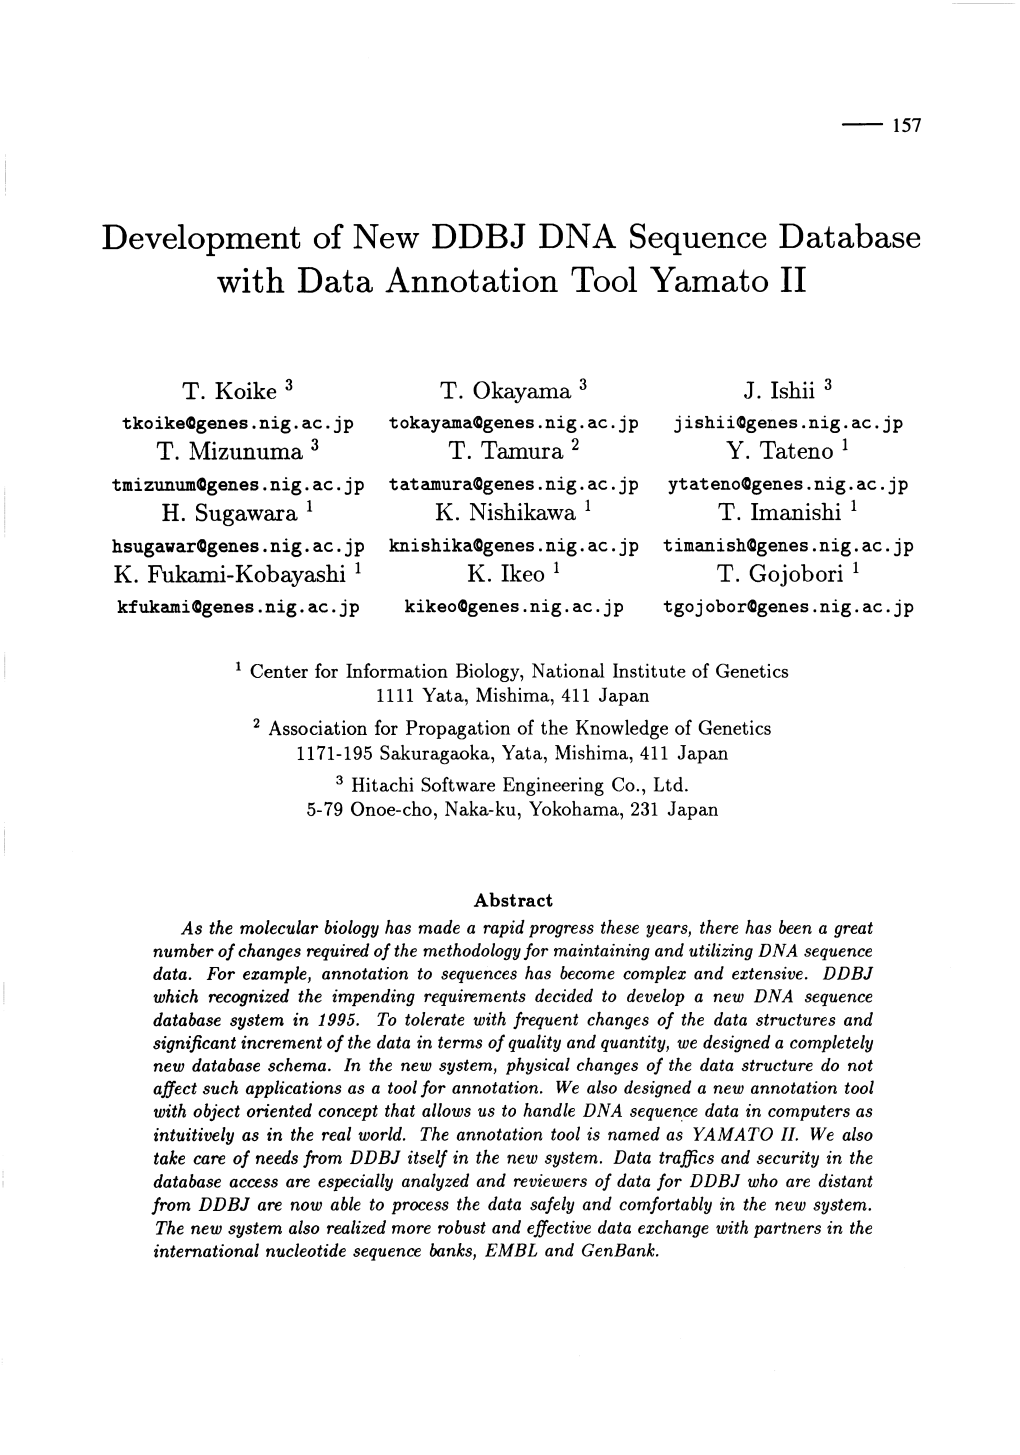 Development of New DDBJ DNA Sequence Database with Data Annotation Tool Yamato II